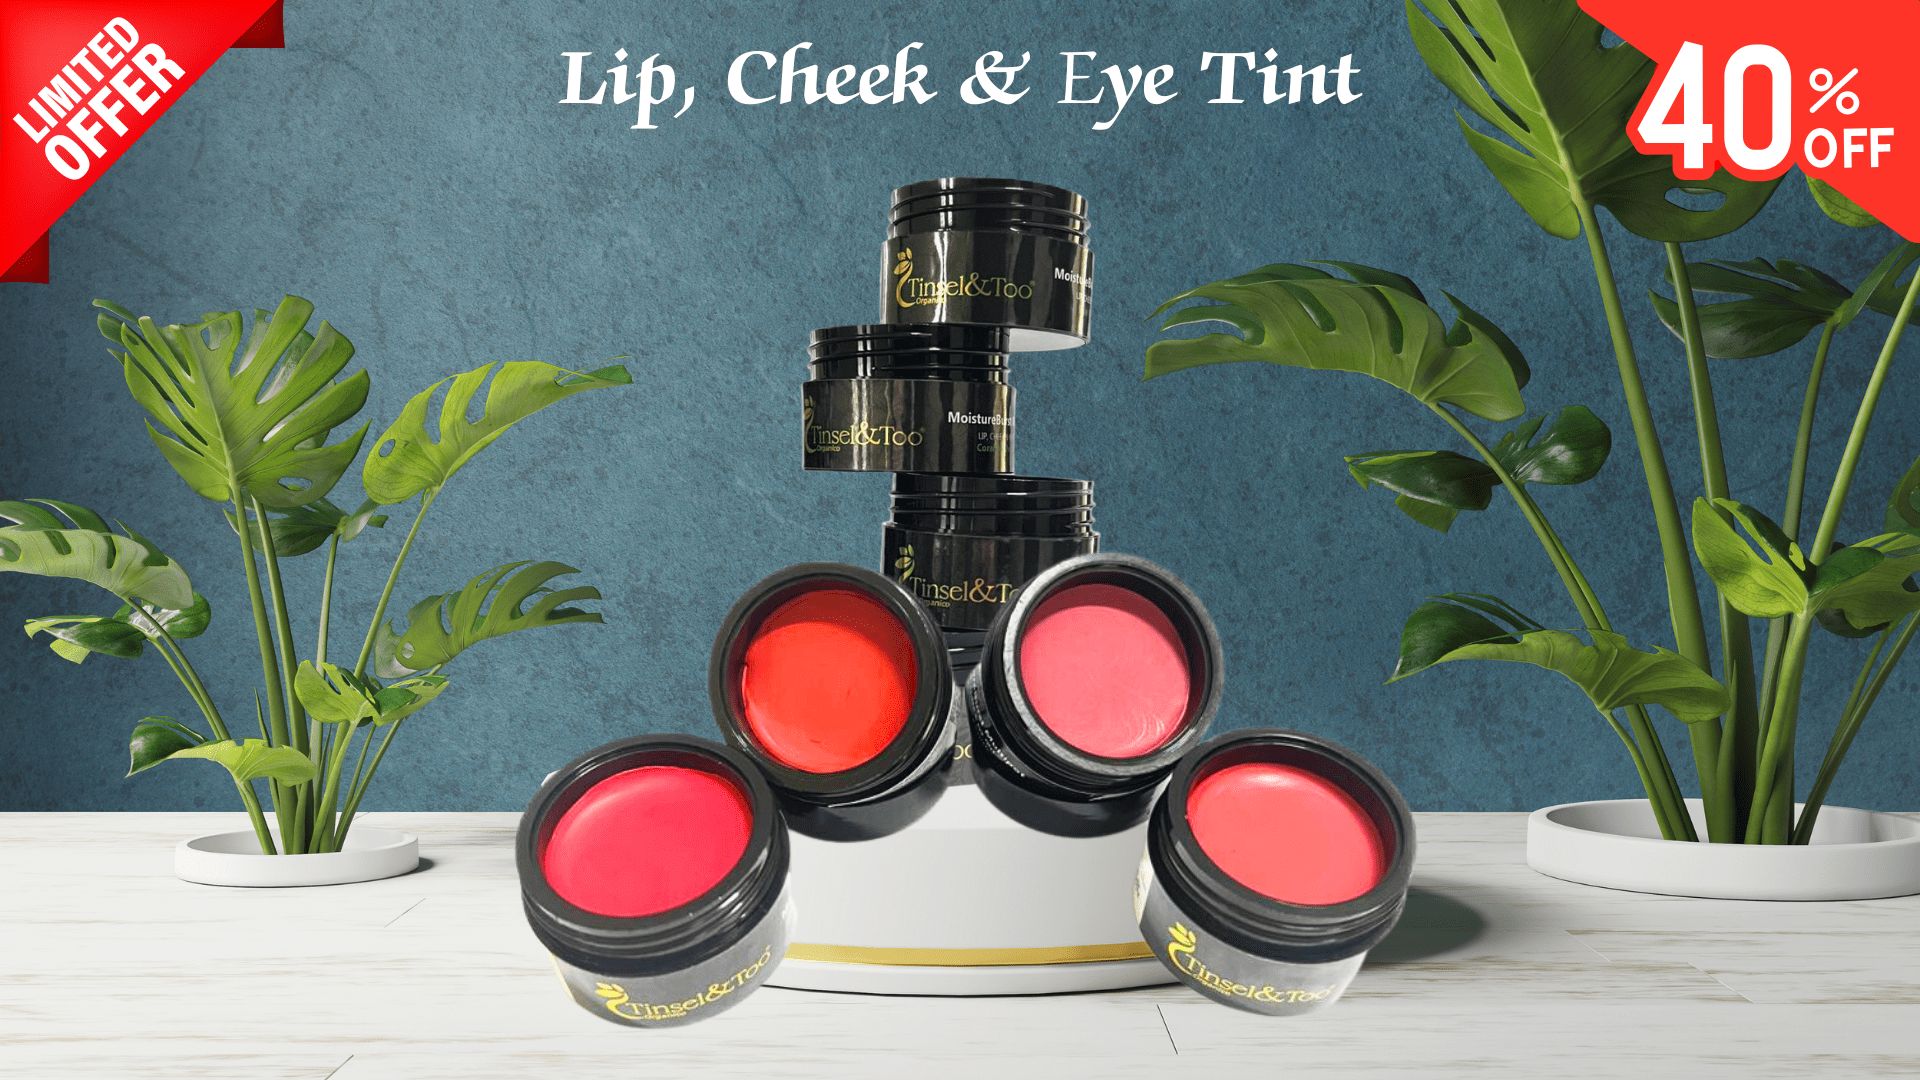 Lip, Cheek & Eye Tint - By Tinsel and Too - Plant-based Clean Beauty Products at 40%Off